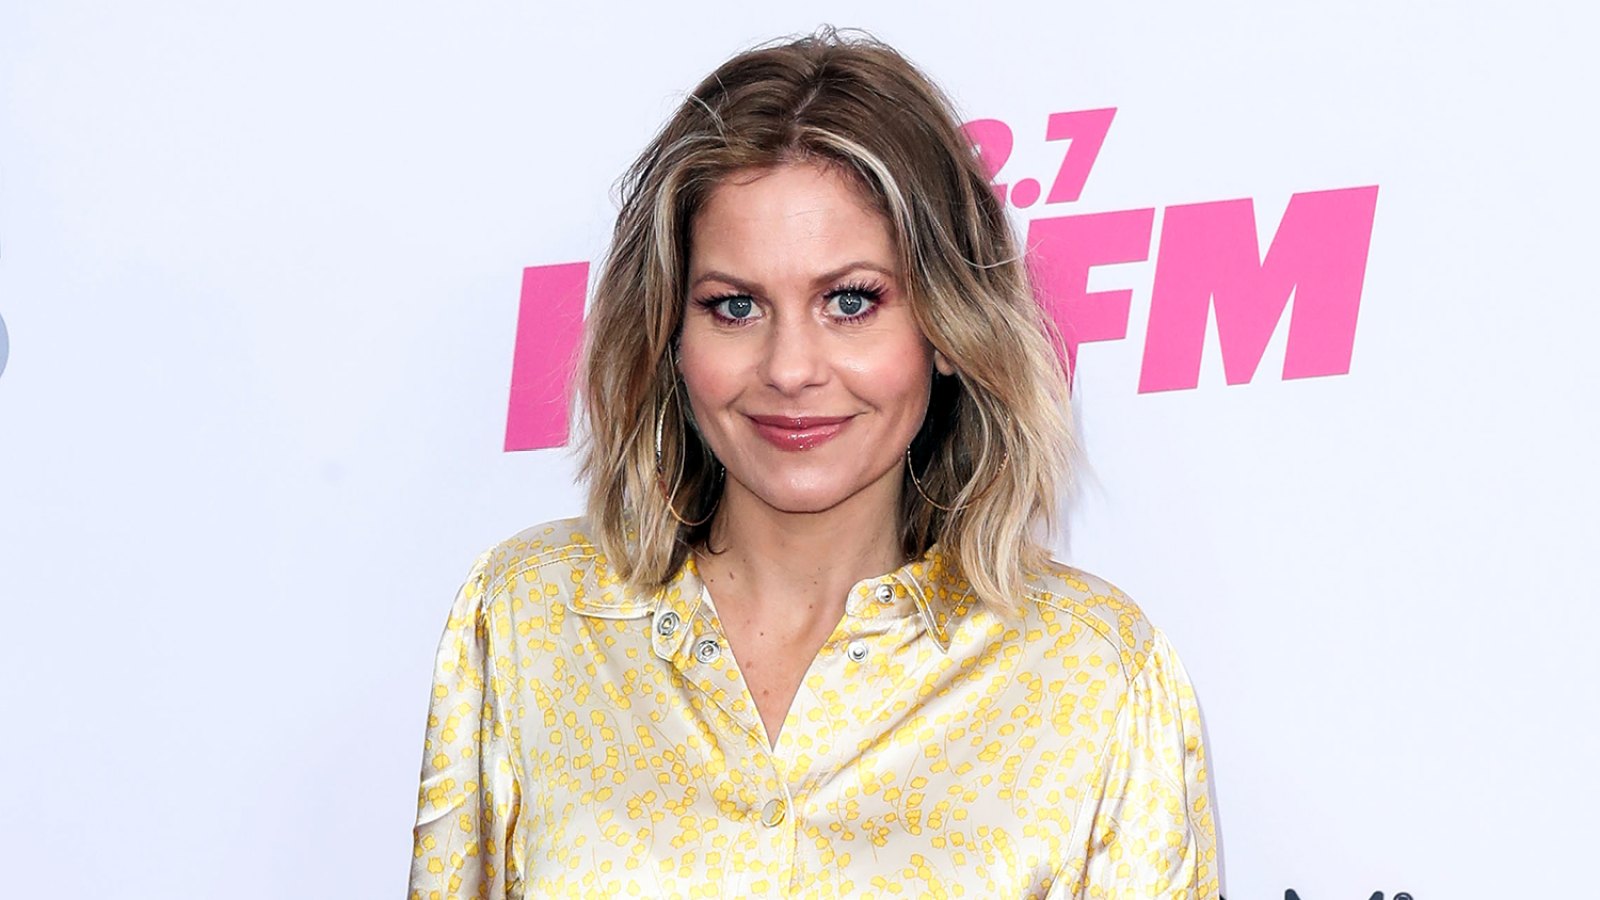 Candace Cameron Bure Reflects on Being a Conservative In Hollywood